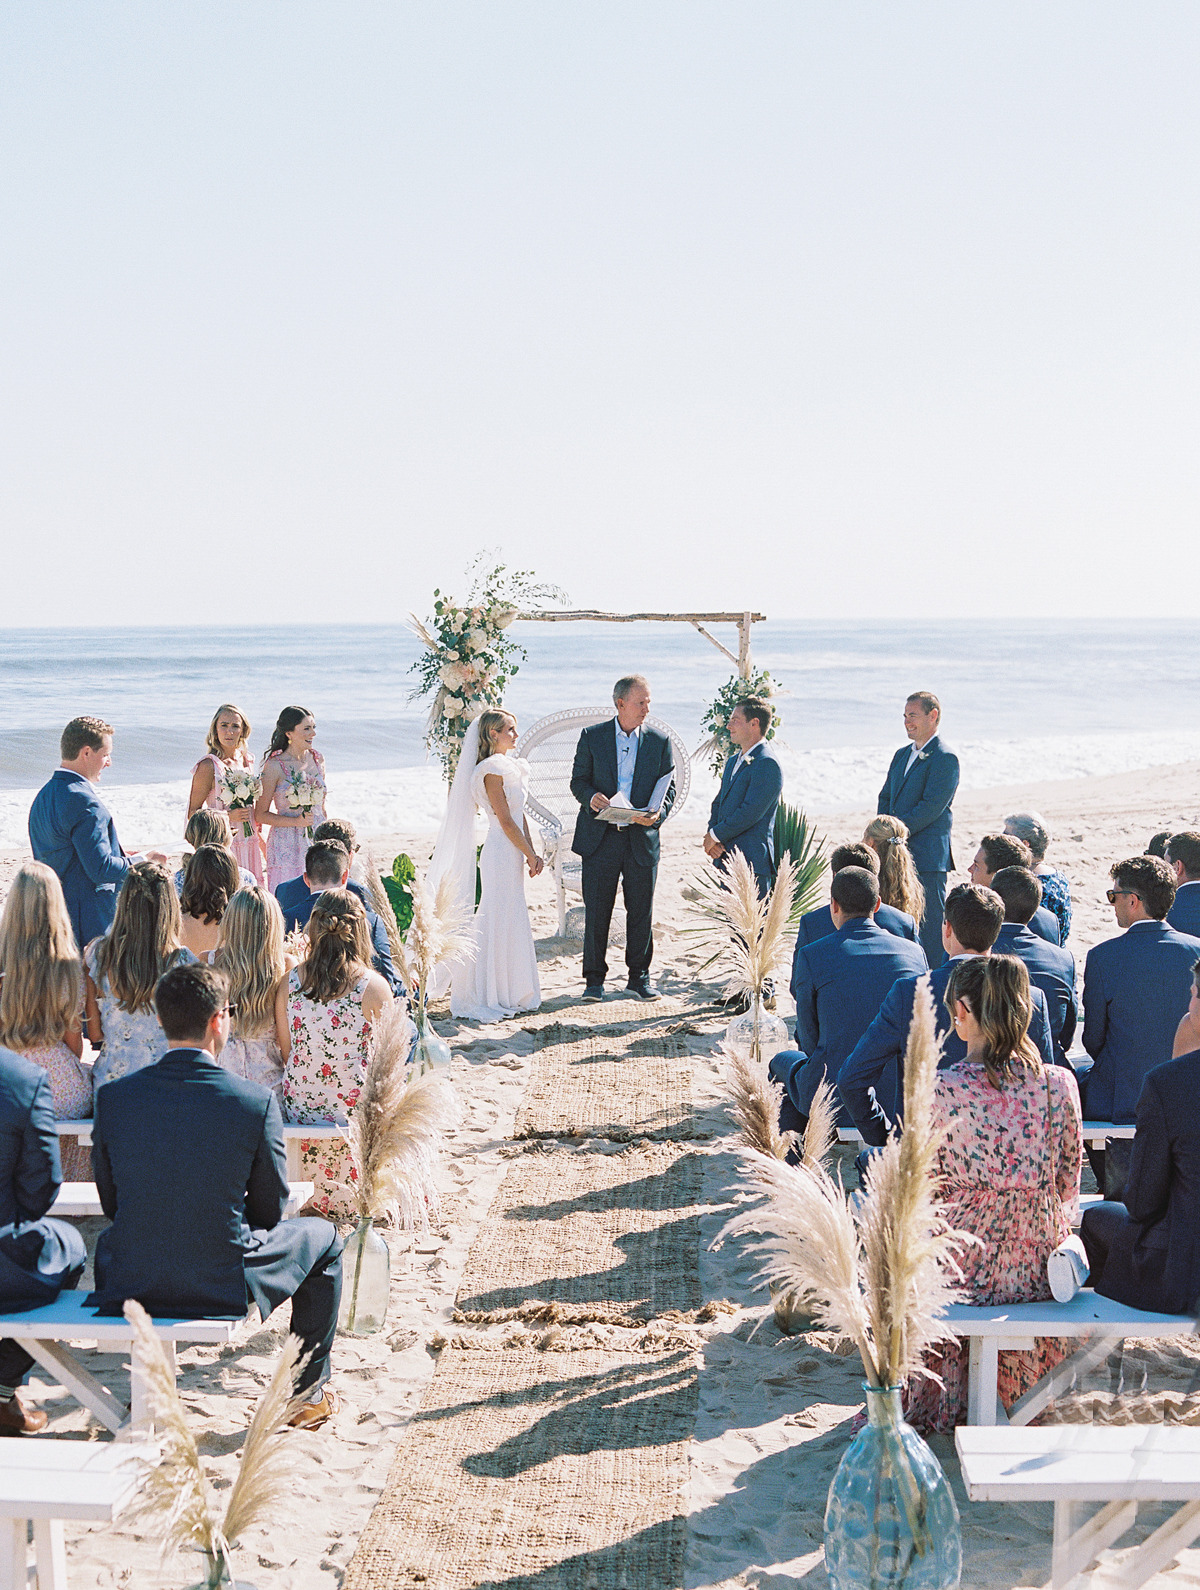 Bride and groom during ceremony on beach while guests watch